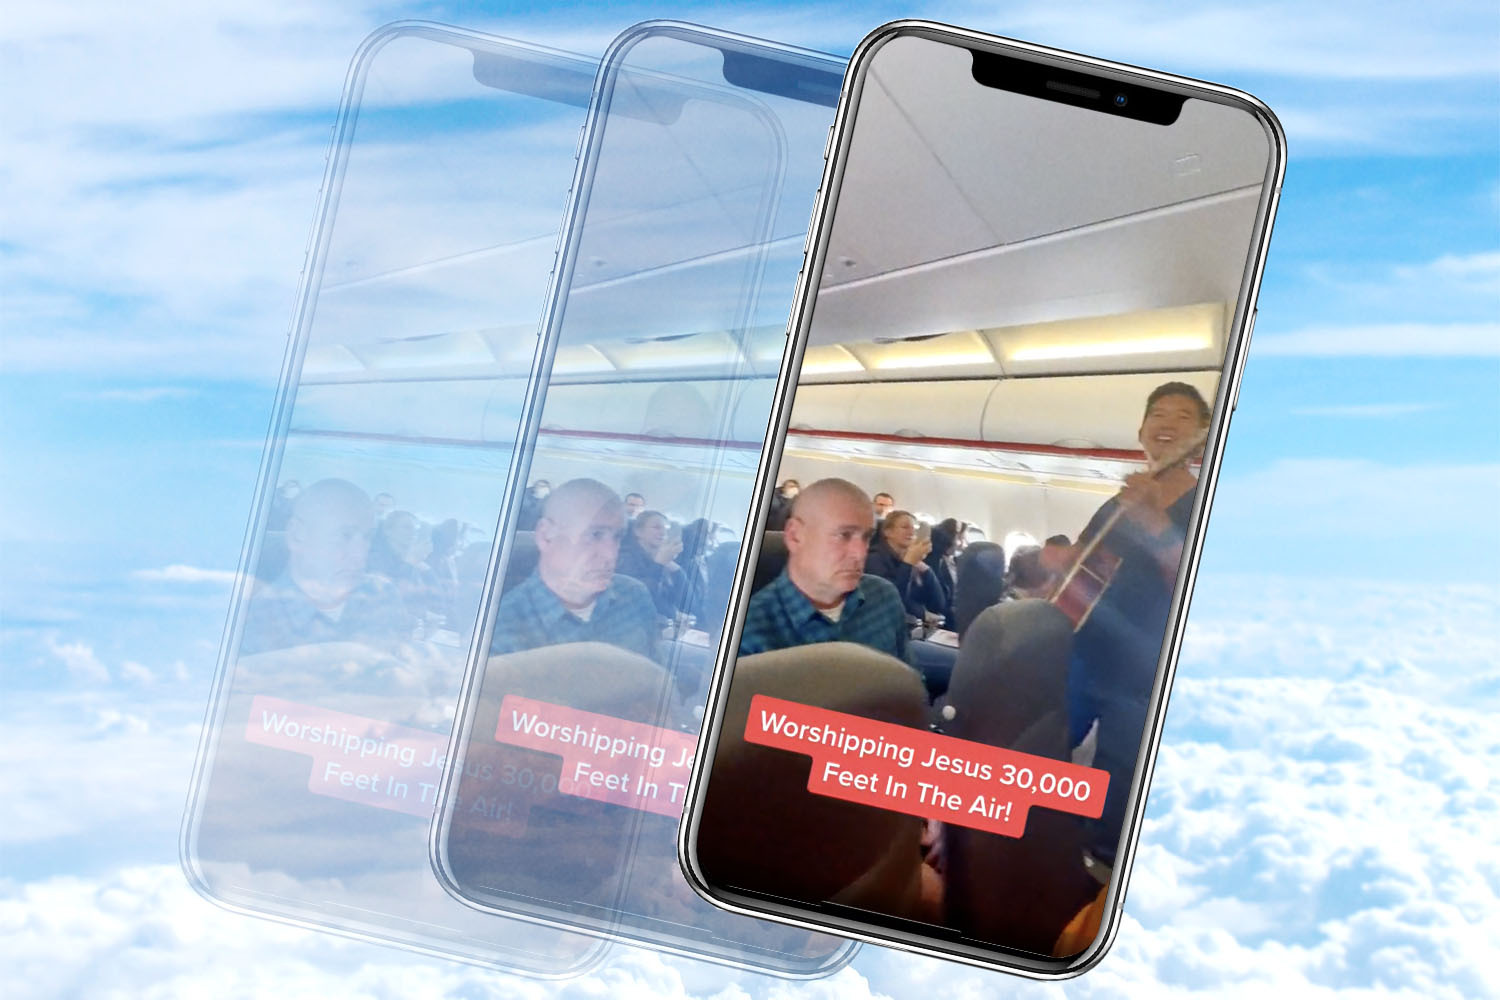 A smartphone with a screenshot of a TikTok video in which Christian evangelists perform a religious song on an EasyJet flight